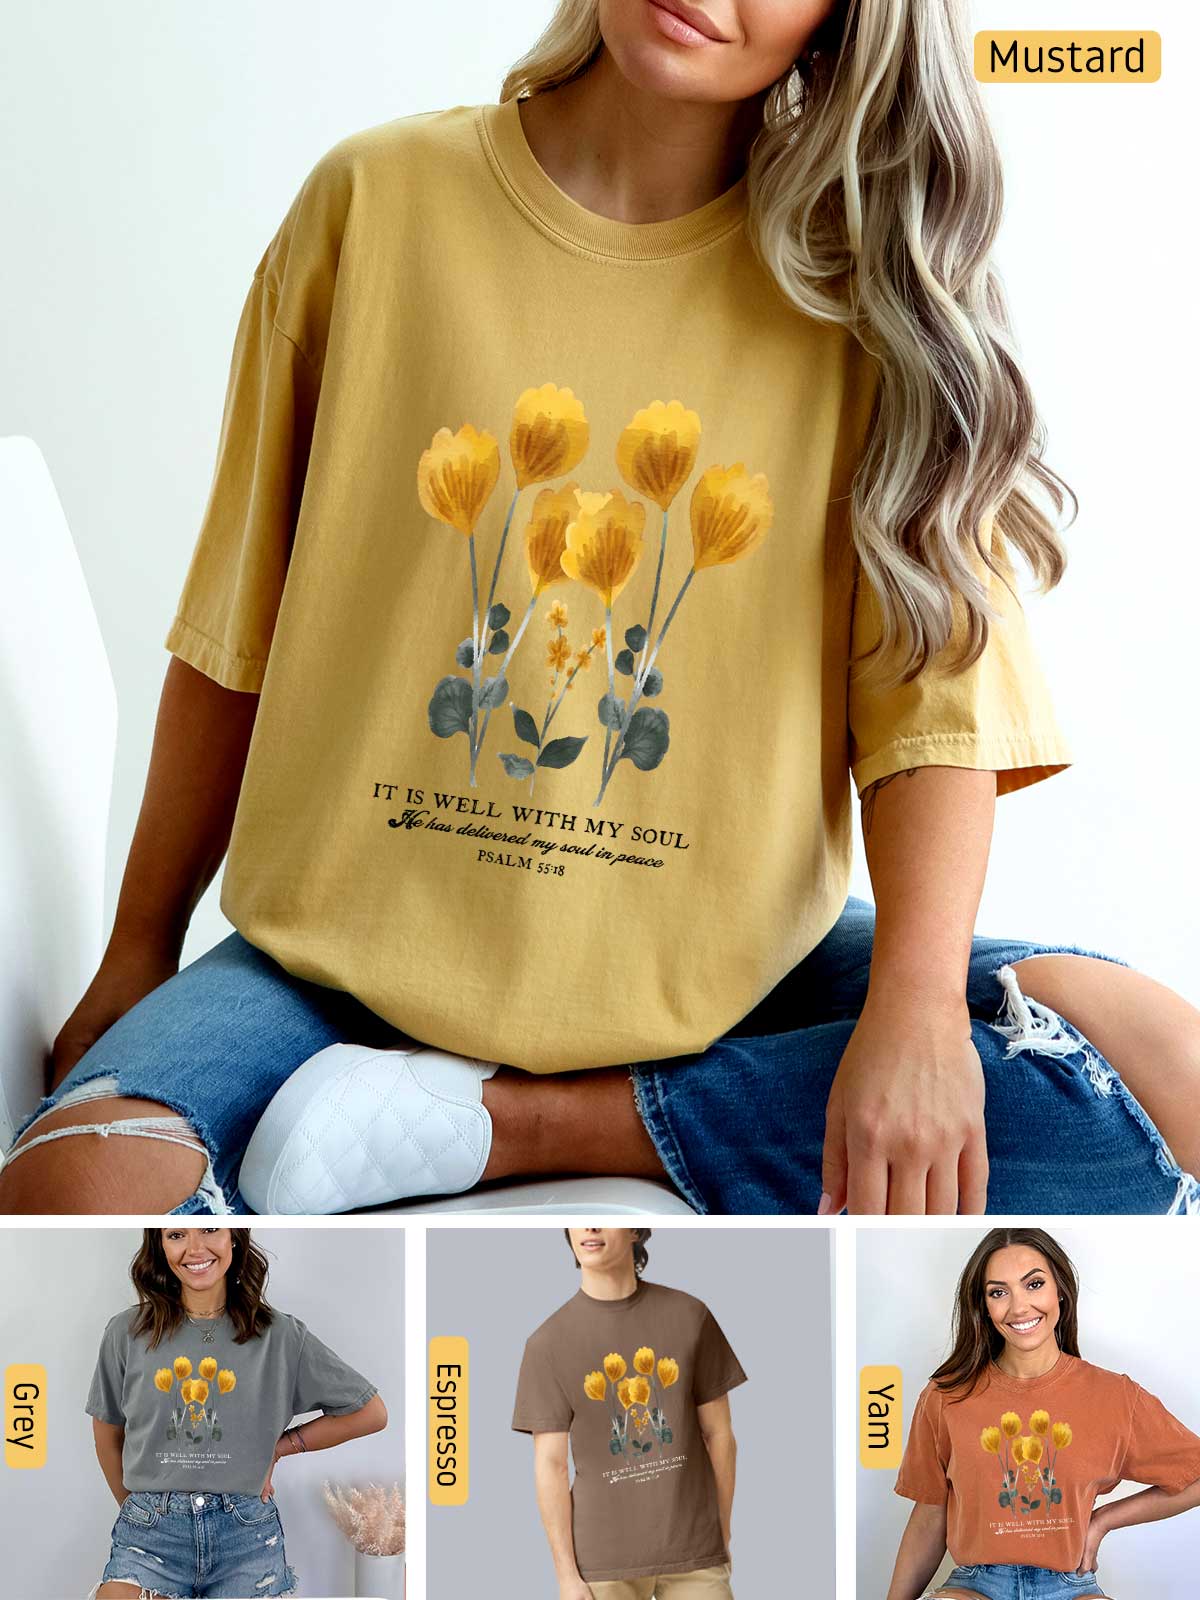 a woman wearing a mustard colored t - shirt with yellow flowers on it